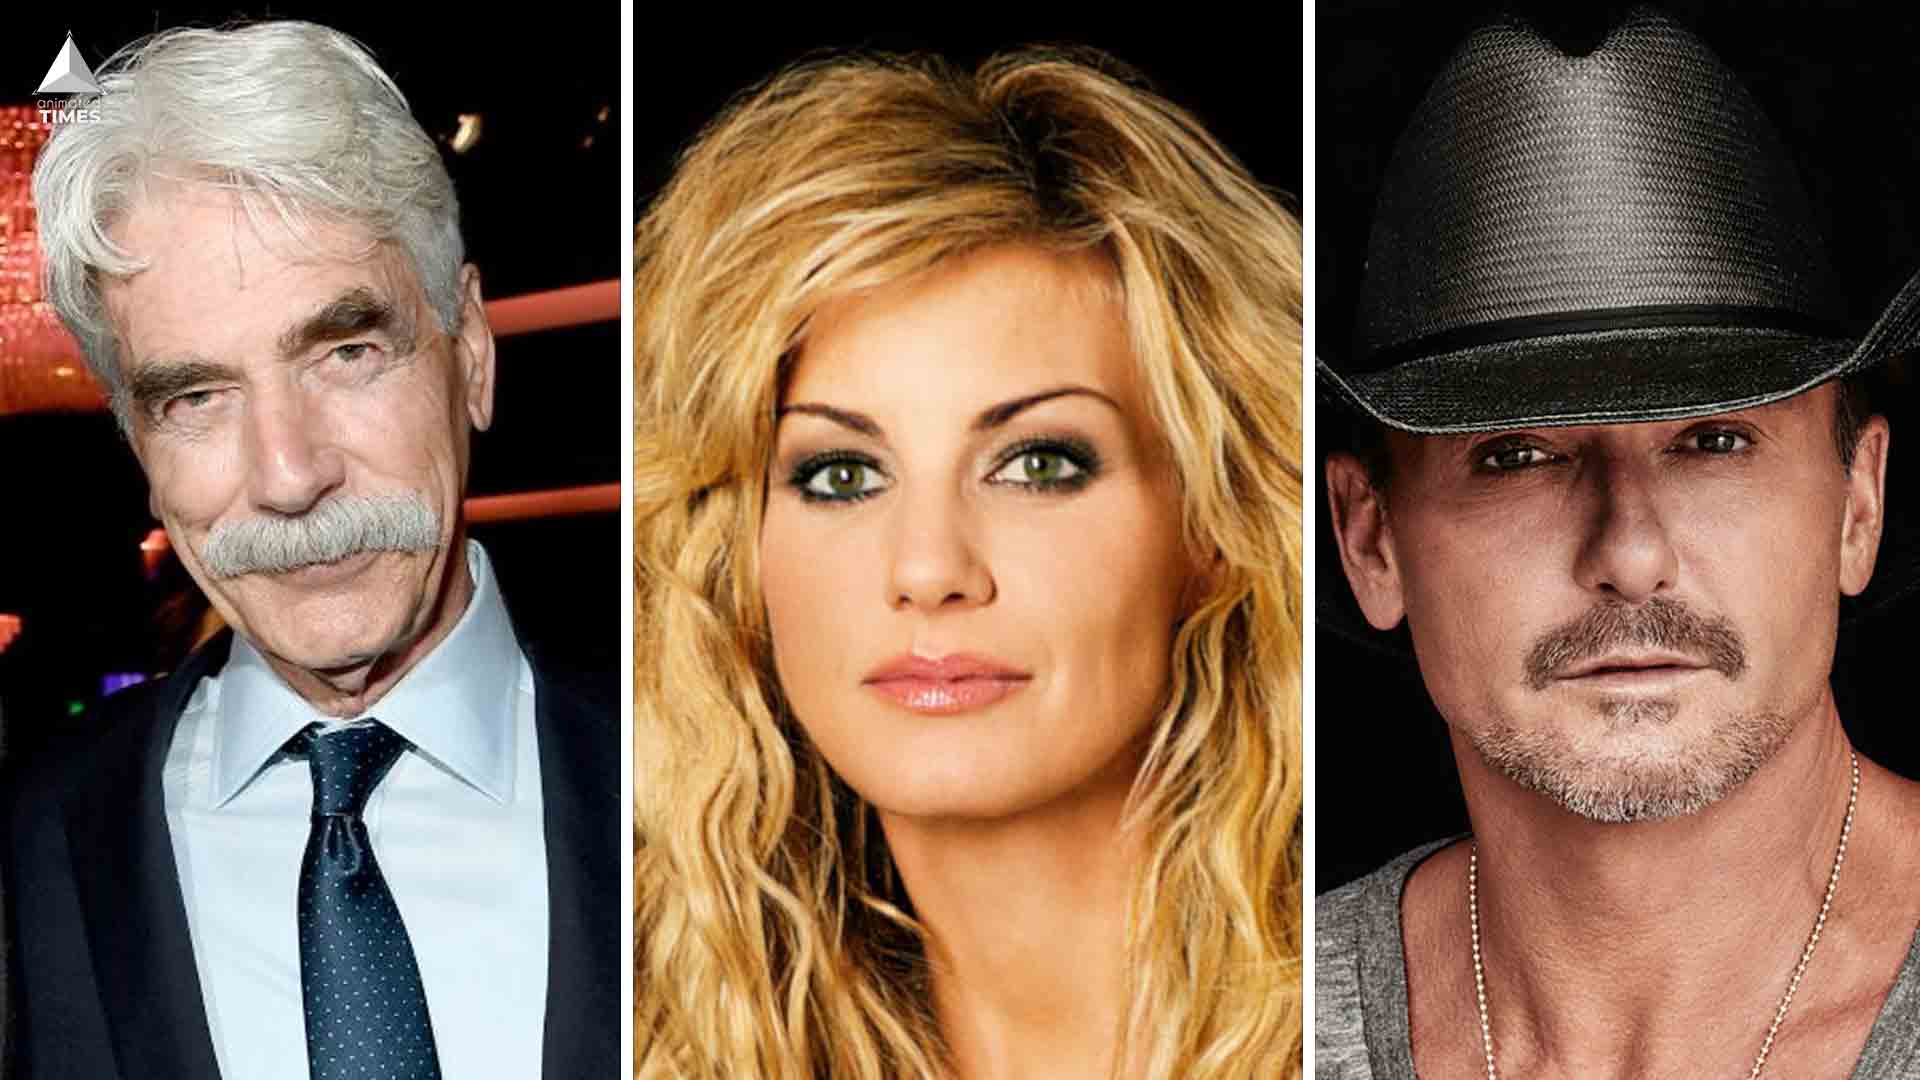 Yellowstone Spinoff Sam Elliott Tim McGraw and Faith Hill to Star in Prequel Series 1883 at Paramount